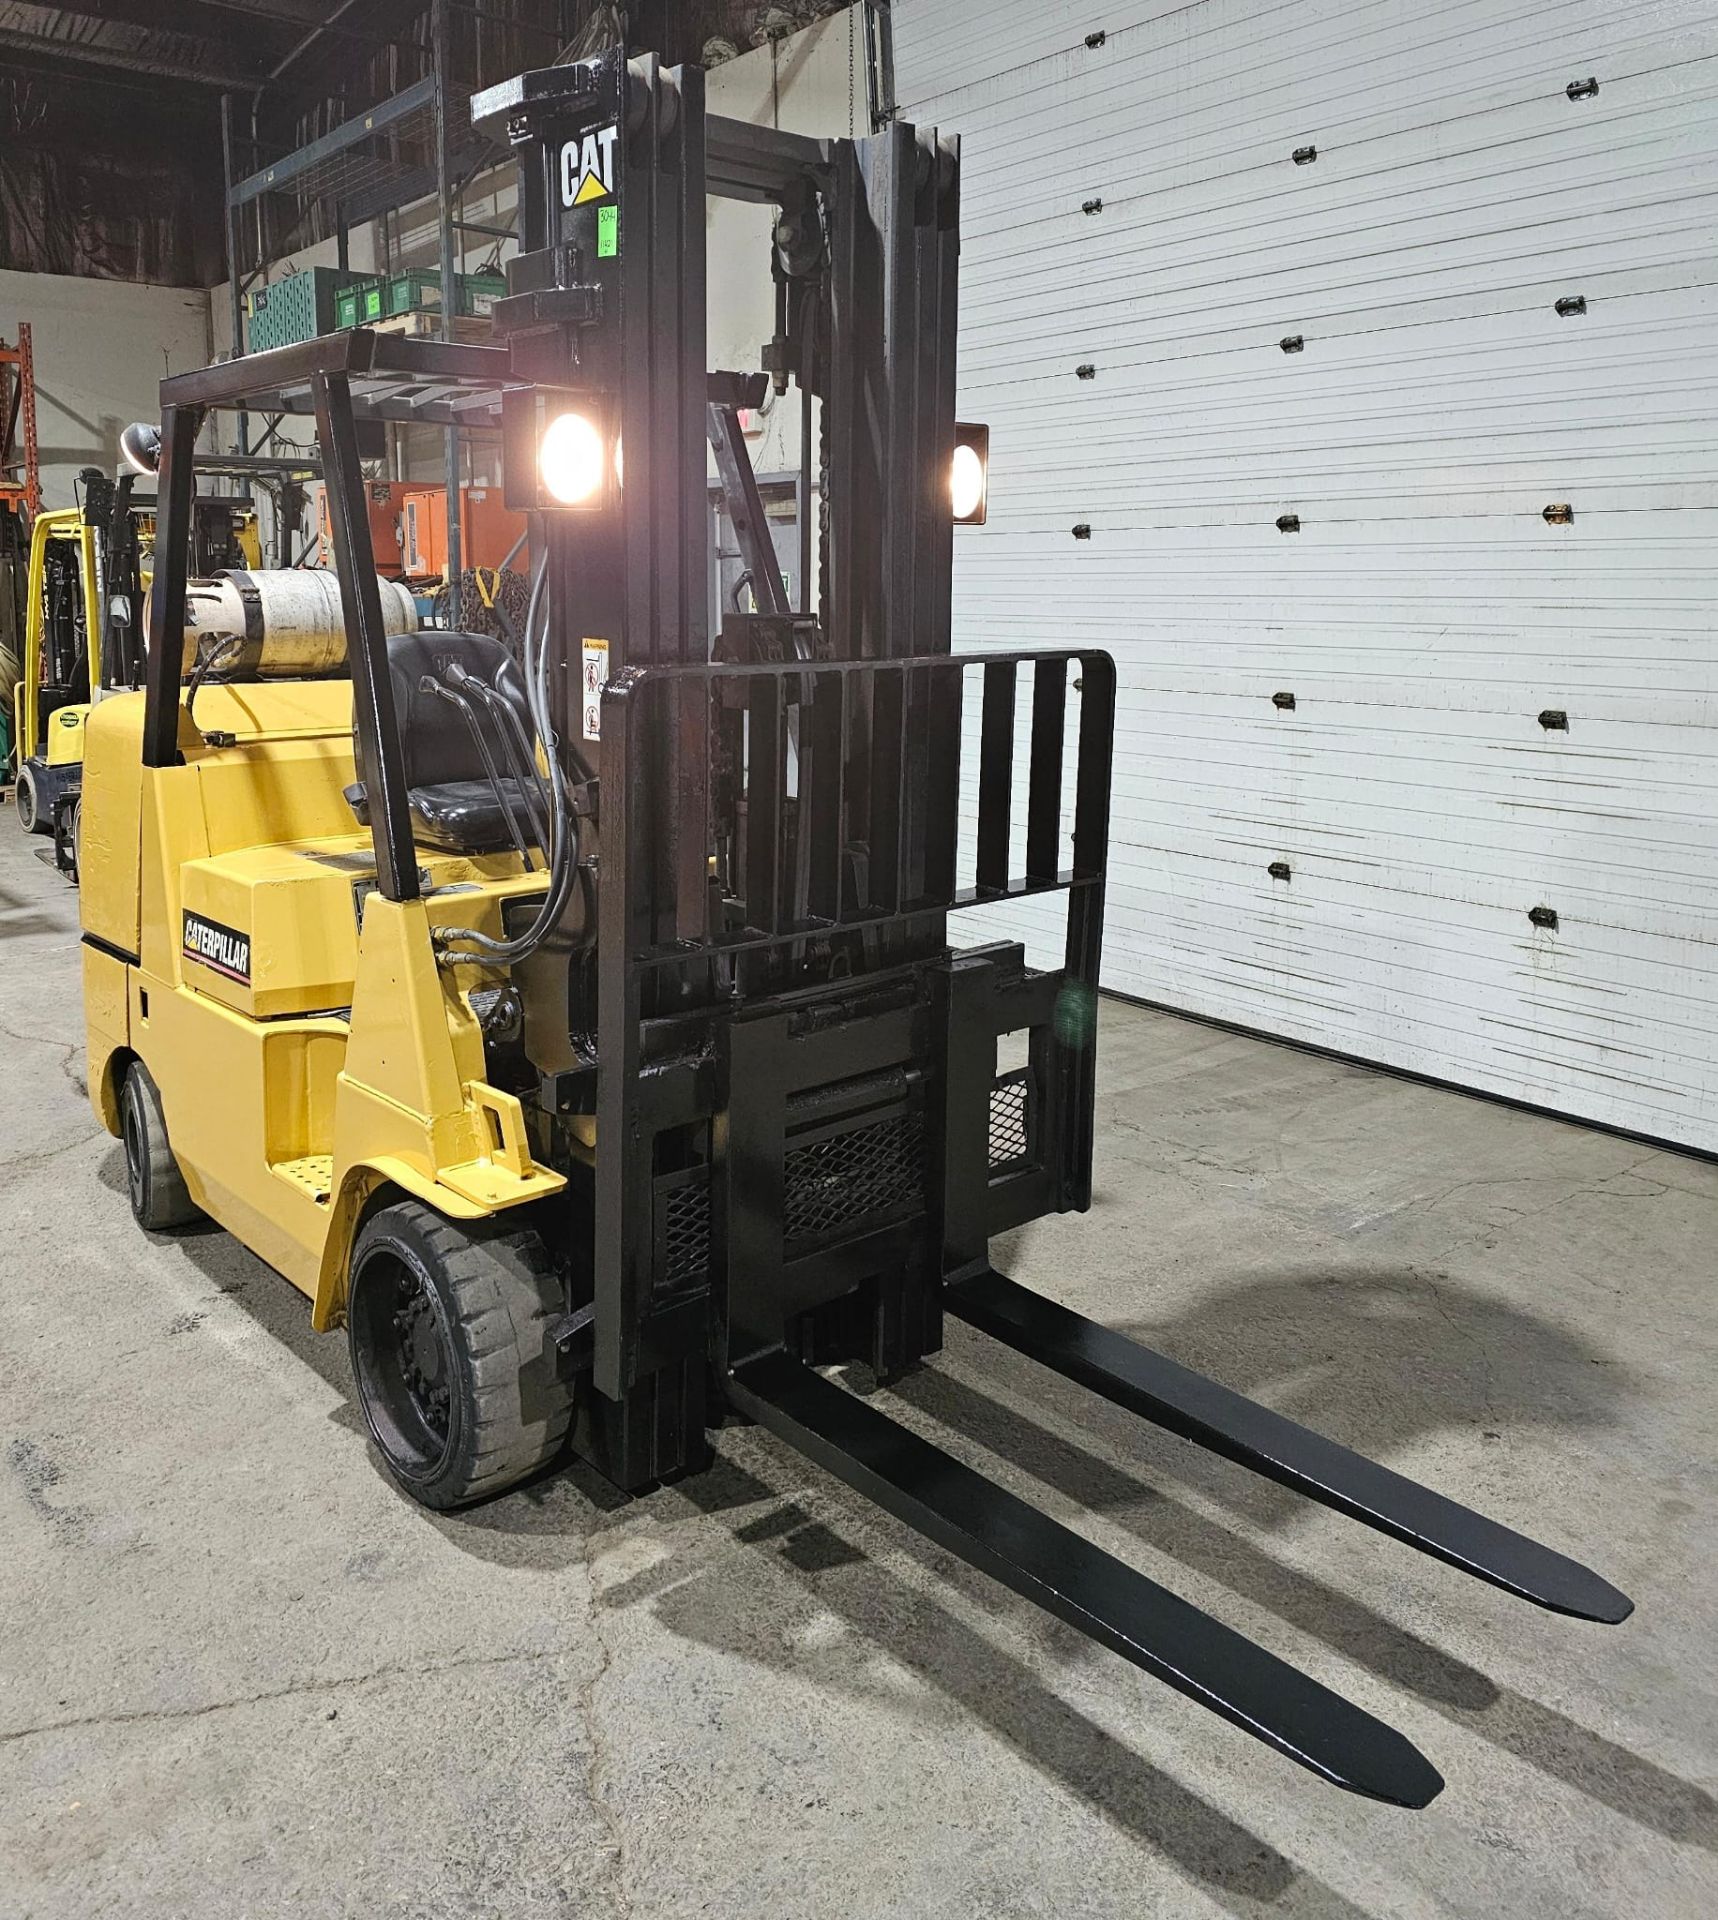 CAT 9,000lbs Capacity LPG (Propane) Forklift with sideshift & 3-STAGE MAST 209" load height (no tank - Image 4 of 5